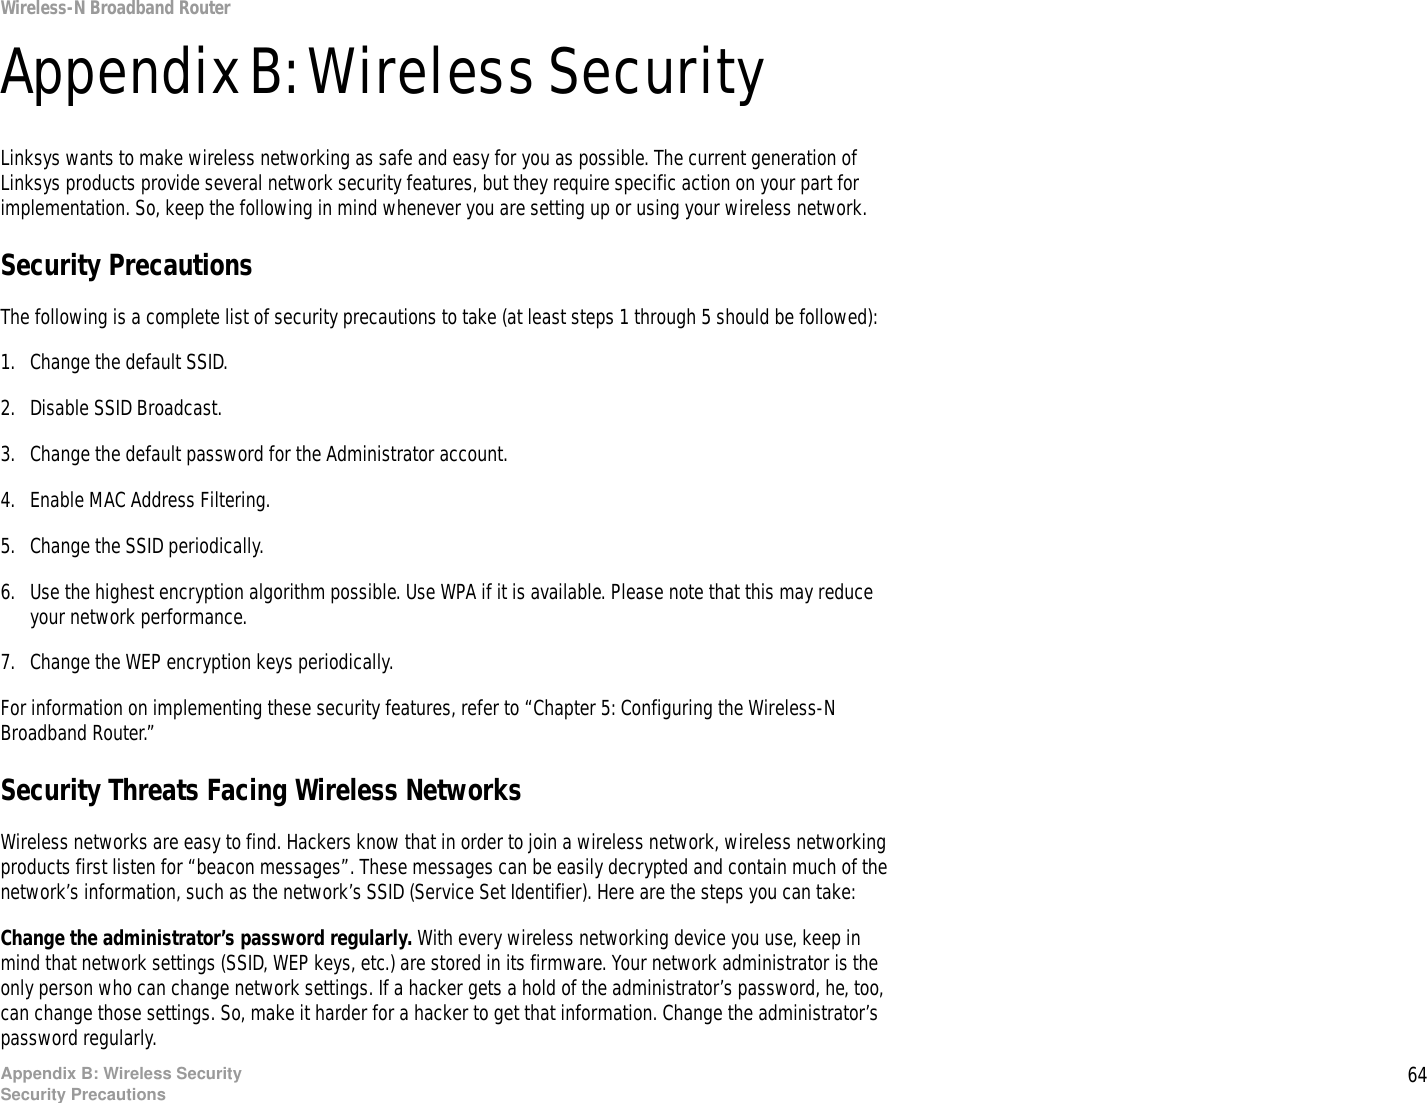 64Appendix B: Wireless SecuritySecurity PrecautionsWireless-N Broadband RouterAppendix B: Wireless SecurityLinksys wants to make wireless networking as safe and easy for you as possible. The current generation of Linksys products provide several network security features, but they require specific action on your part for implementation. So, keep the following in mind whenever you are setting up or using your wireless network.Security PrecautionsThe following is a complete list of security precautions to take (at least steps 1 through 5 should be followed):1. Change the default SSID. 2. Disable SSID Broadcast. 3. Change the default password for the Administrator account. 4. Enable MAC Address Filtering. 5. Change the SSID periodically. 6. Use the highest encryption algorithm possible. Use WPA if it is available. Please note that this may reduce your network performance. 7. Change the WEP encryption keys periodically. For information on implementing these security features, refer to “Chapter 5: Configuring the Wireless-N Broadband Router.”Security Threats Facing Wireless Networks Wireless networks are easy to find. Hackers know that in order to join a wireless network, wireless networking products first listen for “beacon messages”. These messages can be easily decrypted and contain much of the network’s information, such as the network’s SSID (Service Set Identifier). Here are the steps you can take:Change the administrator’s password regularly. With every wireless networking device you use, keep in mind that network settings (SSID, WEP keys, etc.) are stored in its firmware. Your network administrator is the only person who can change network settings. If a hacker gets a hold of the administrator’s password, he, too, can change those settings. So, make it harder for a hacker to get that information. Change the administrator’s password regularly.